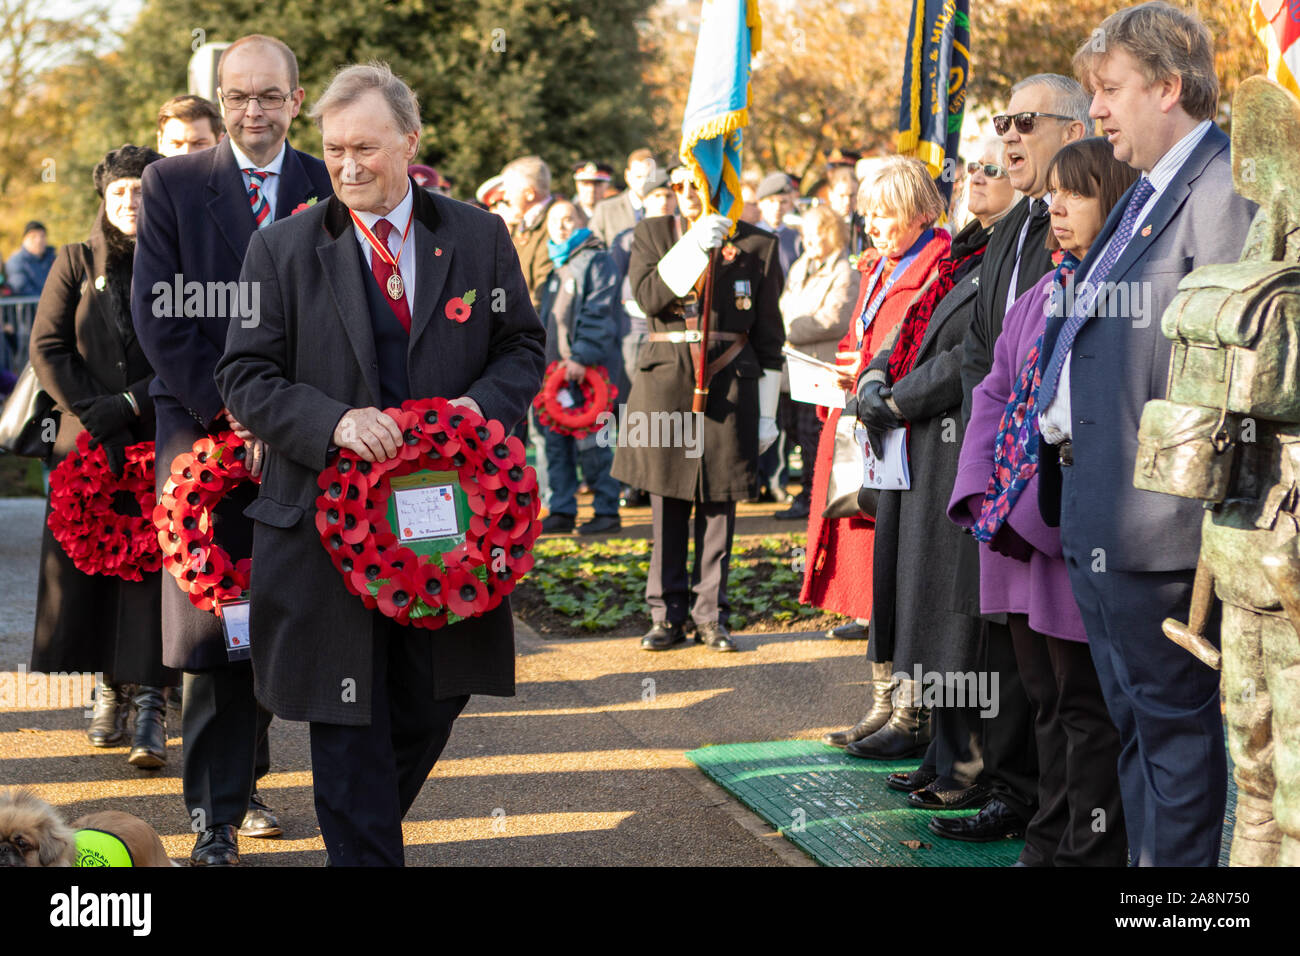 Southend on Sea, UK. 10th Nov, 2019. Sir David Amess and James Dudderidge lay wreaths at the war memorial. Remembrance Day Service at the Southend Cenotaph, Clifftown Parade, in front of the Lutyens designed war memorial. The service is attended by local dignitaries, including the Mayor Southend and both local MPs, Sir David Amess and James Dudderidge. Penelope Barritt/Alamy Live News Stock Photo